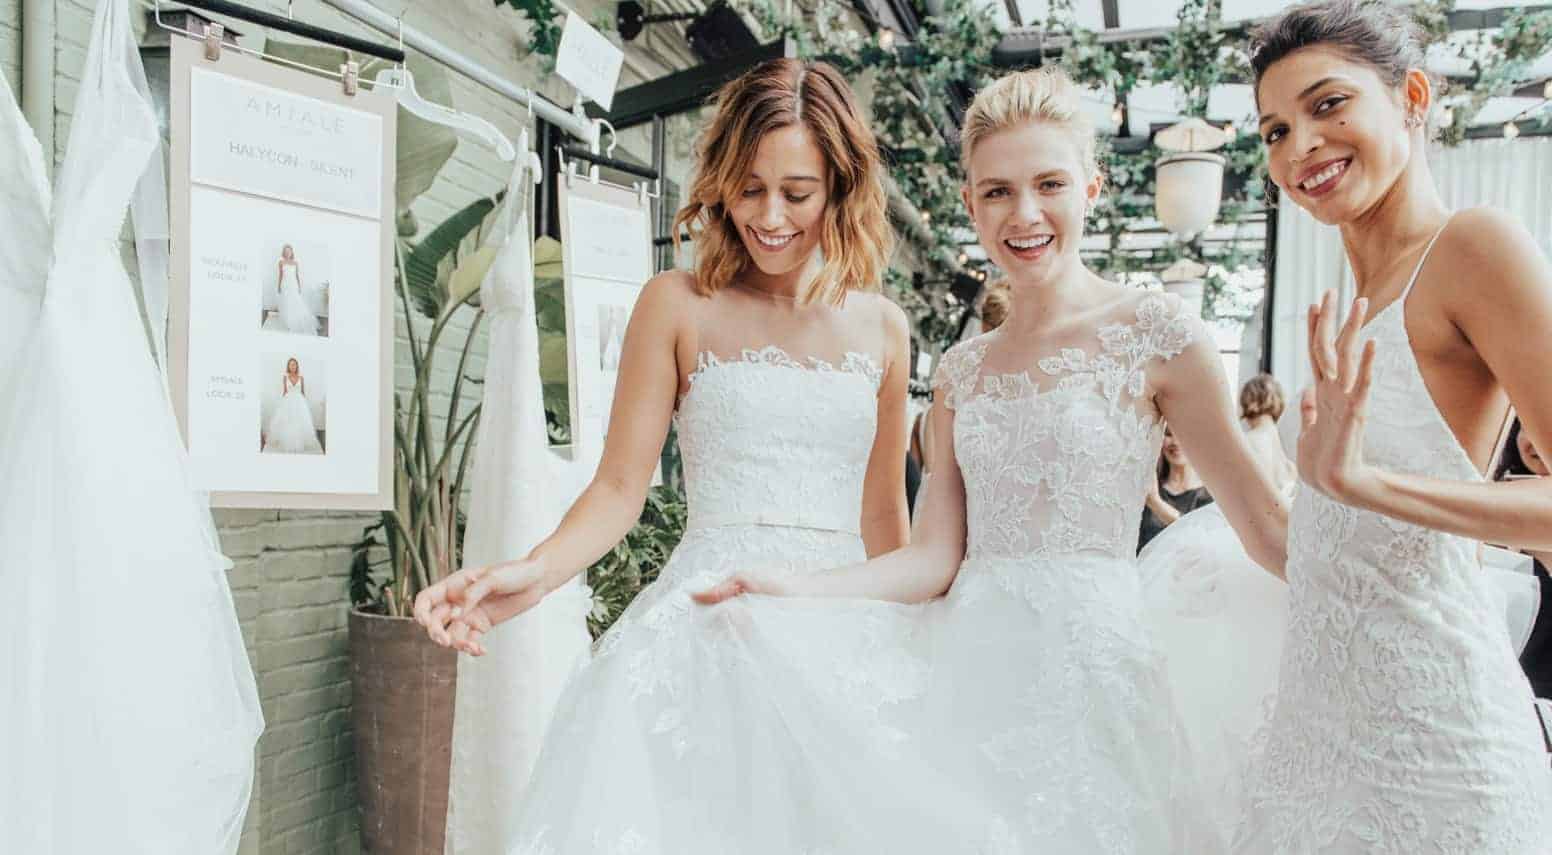 The Bridal Trends of Spring 2019 - The Top 10 Bridal Trends of Spring 2019